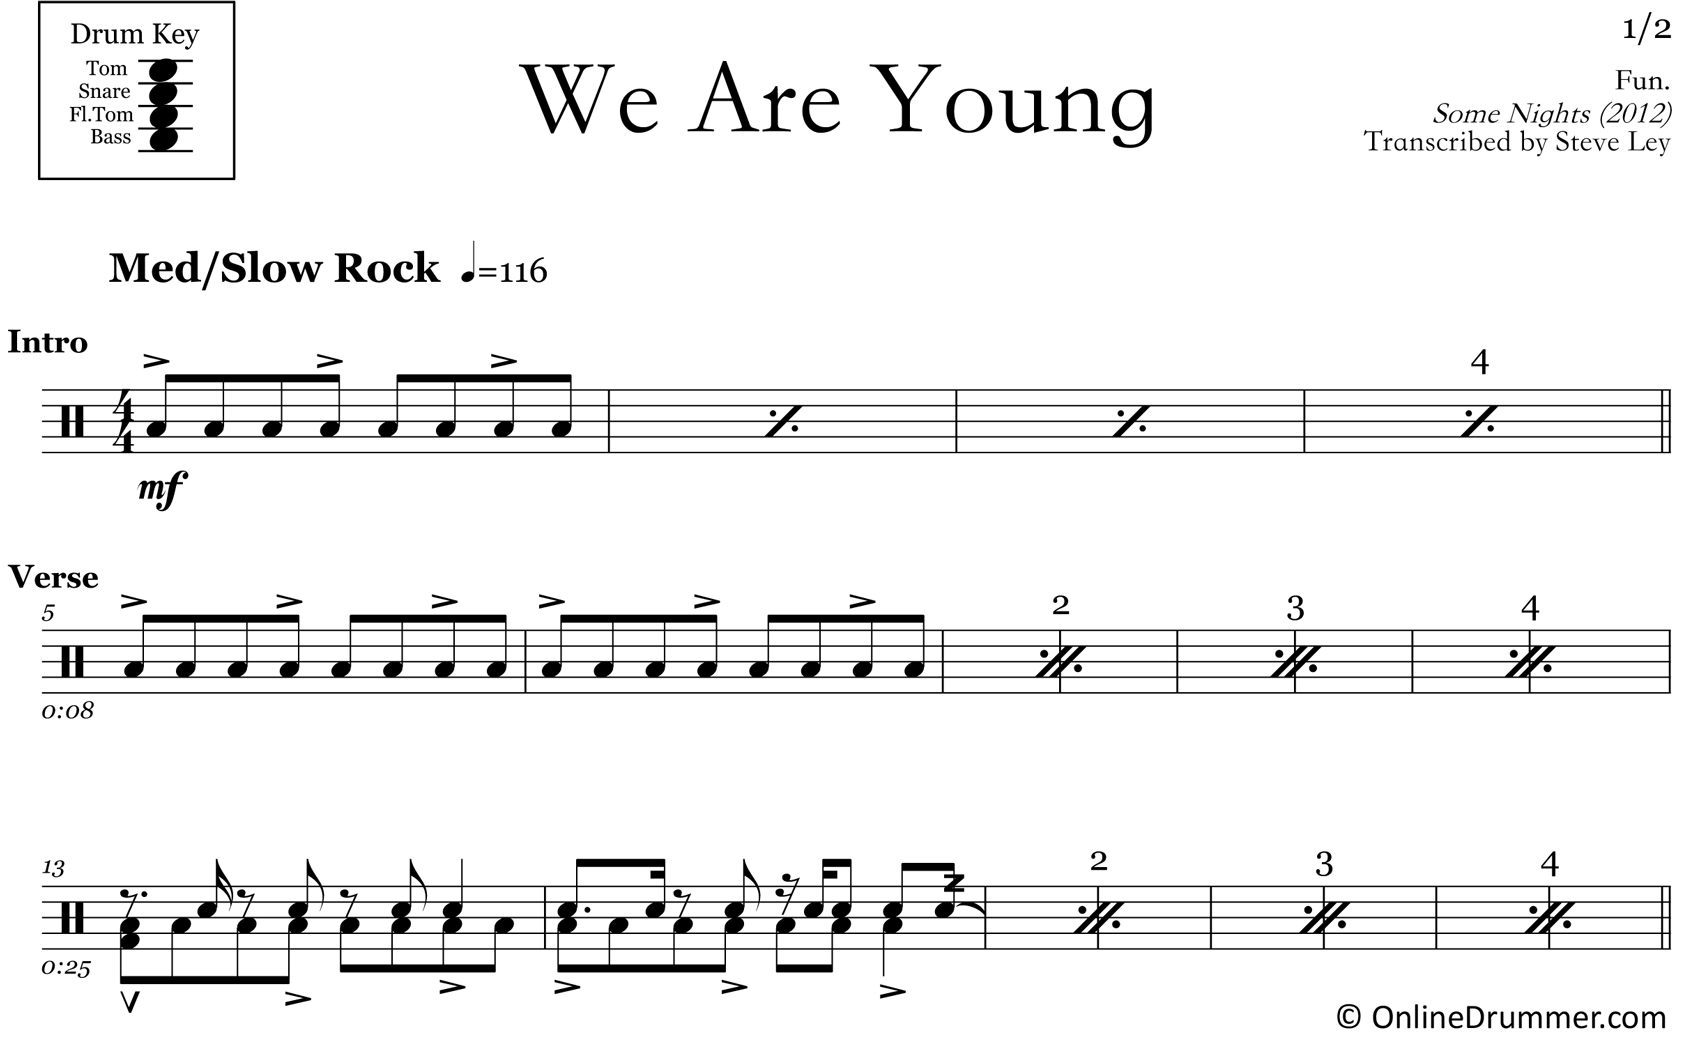 We Are Young - Fun - Drum Sheet Music